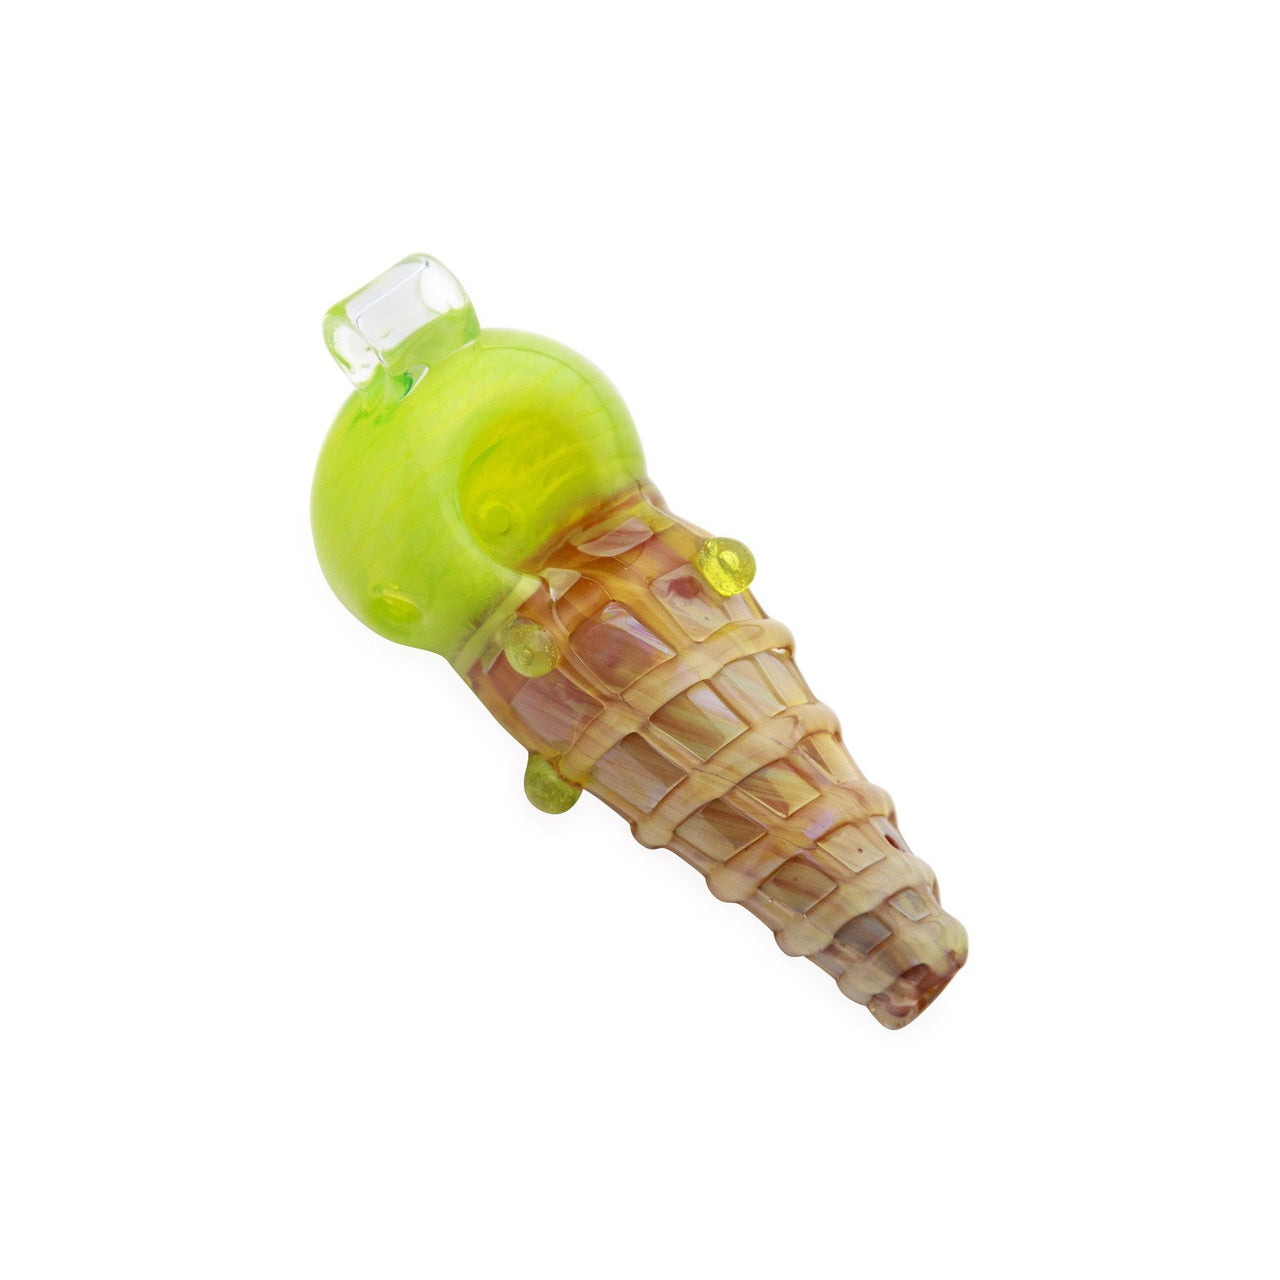 Mathematix Ice Cream Cone Pendant Pipe - 420 Science - The most trusted online smoke shop.